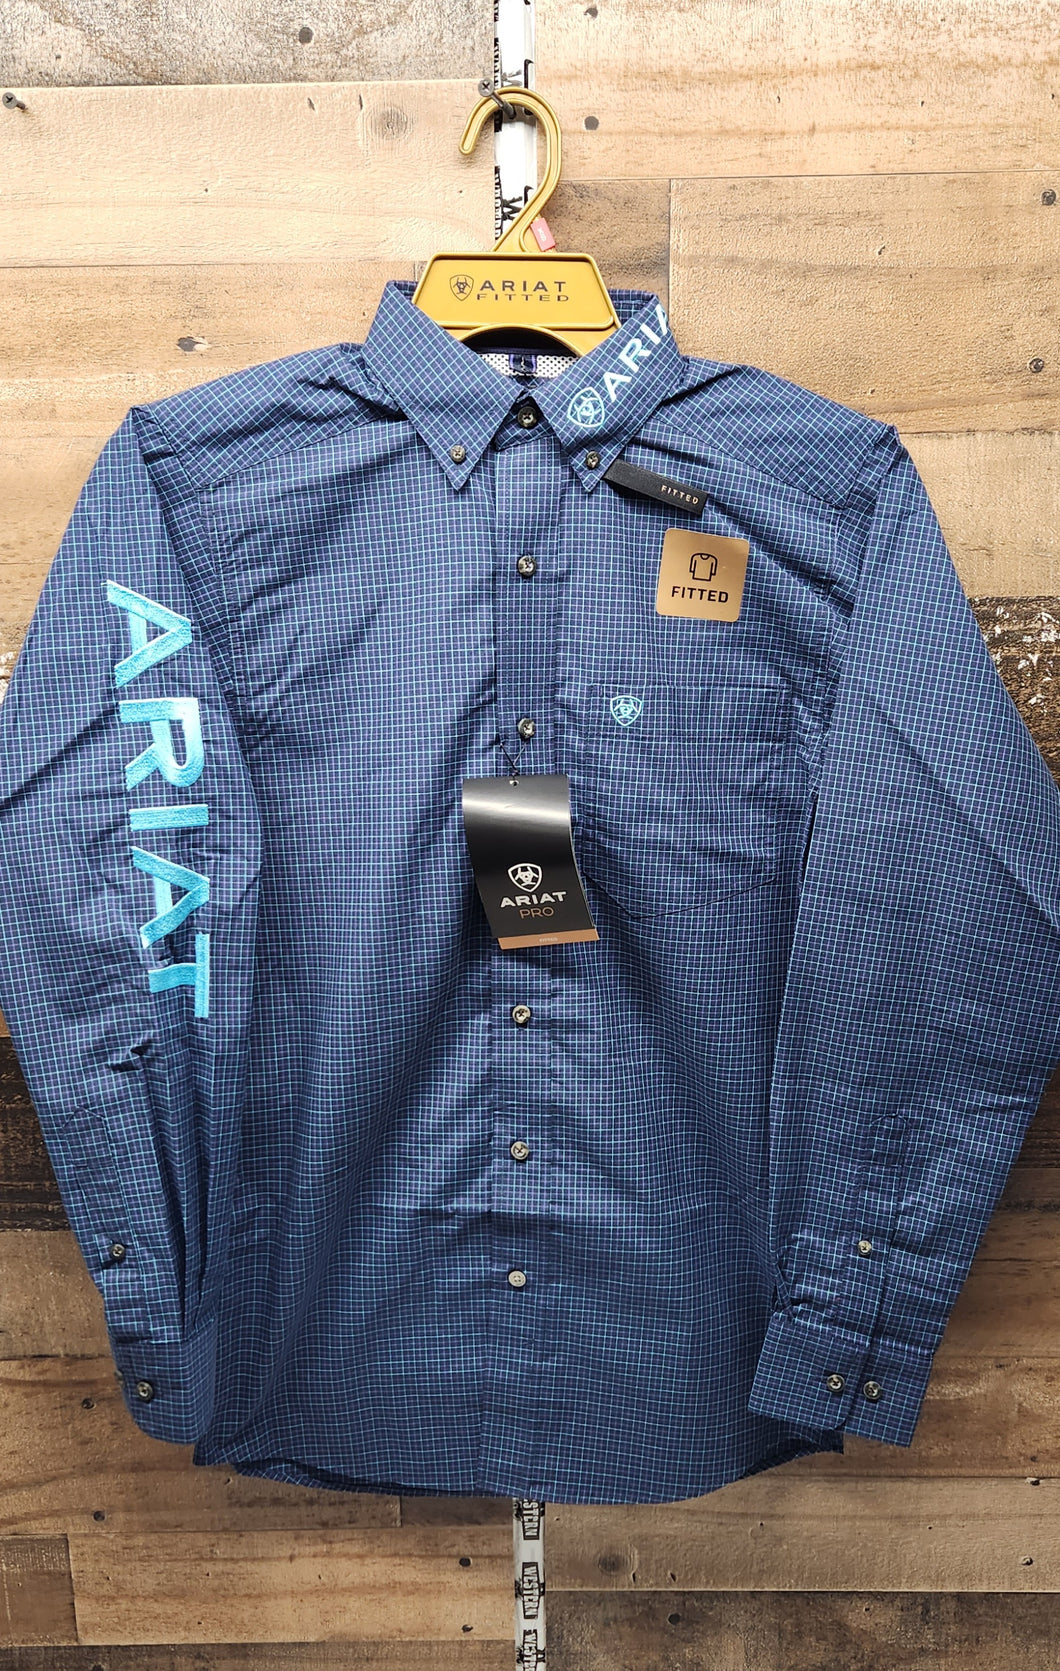 Ariat Men's Team Sully Fitted Shirt - Navy